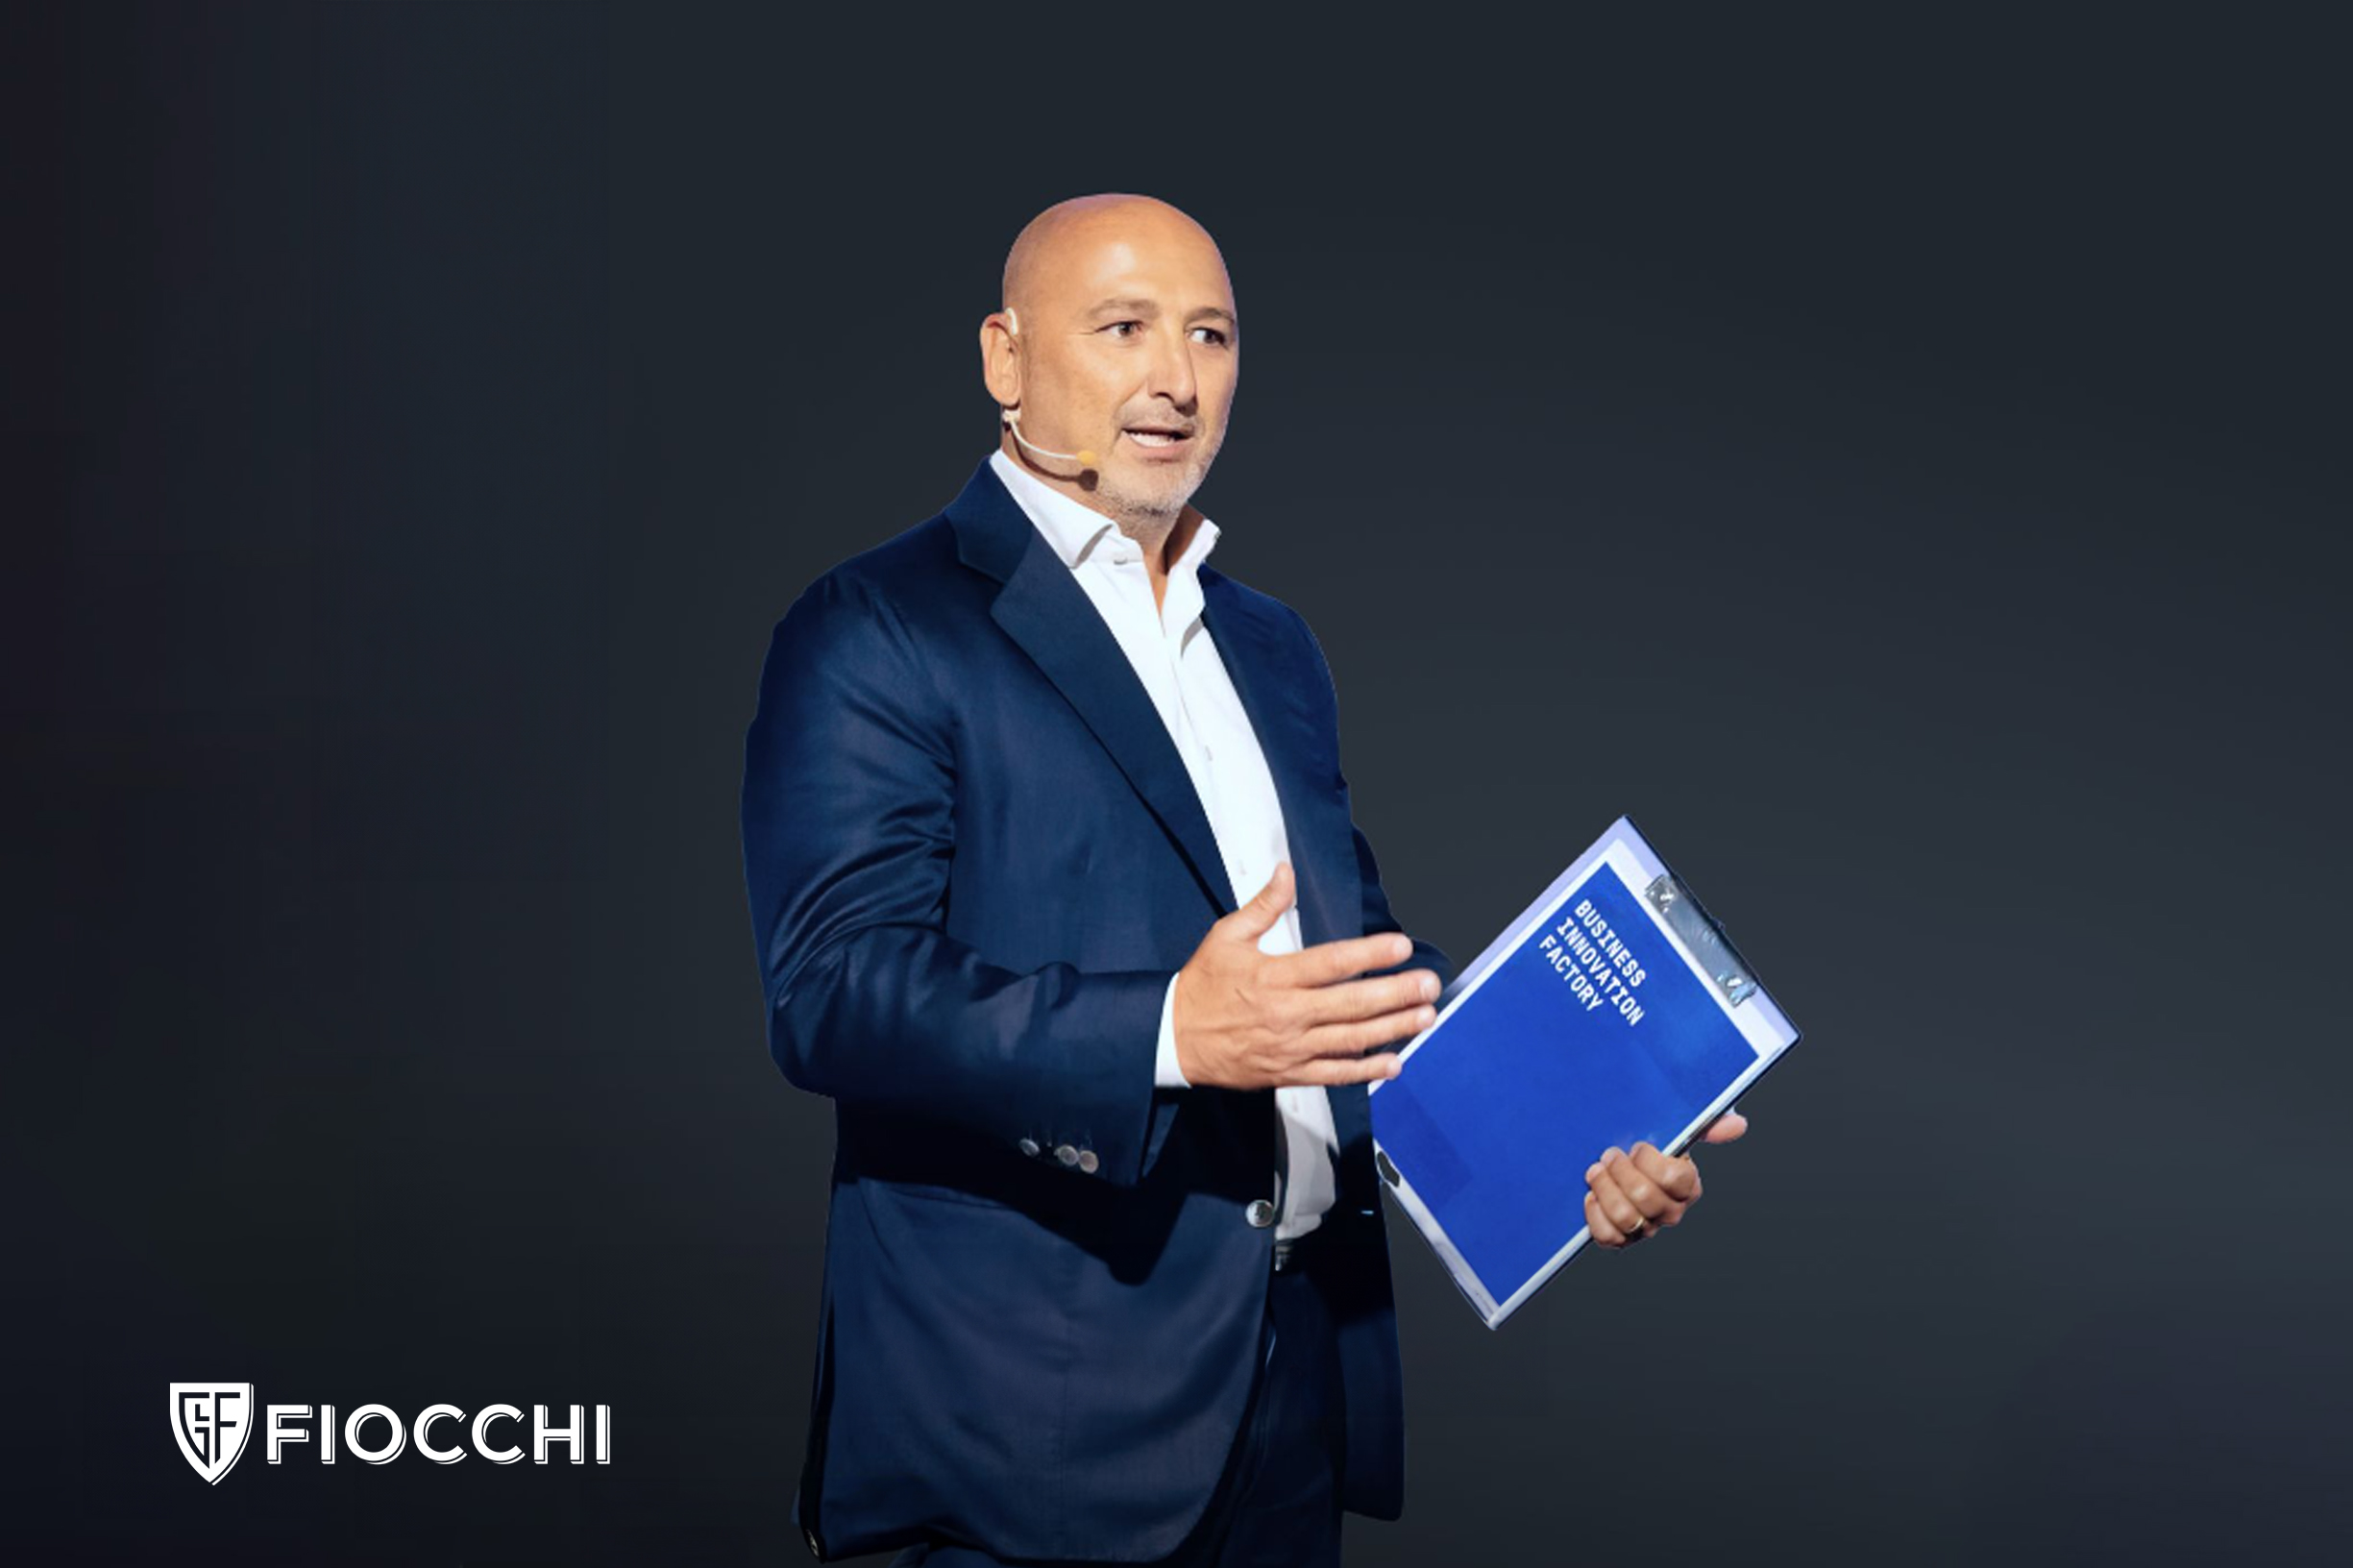 FIOCCHI GROUP IS NOW MANAGED BY THE ITALIAN MANAGER PAOLO SALVATO